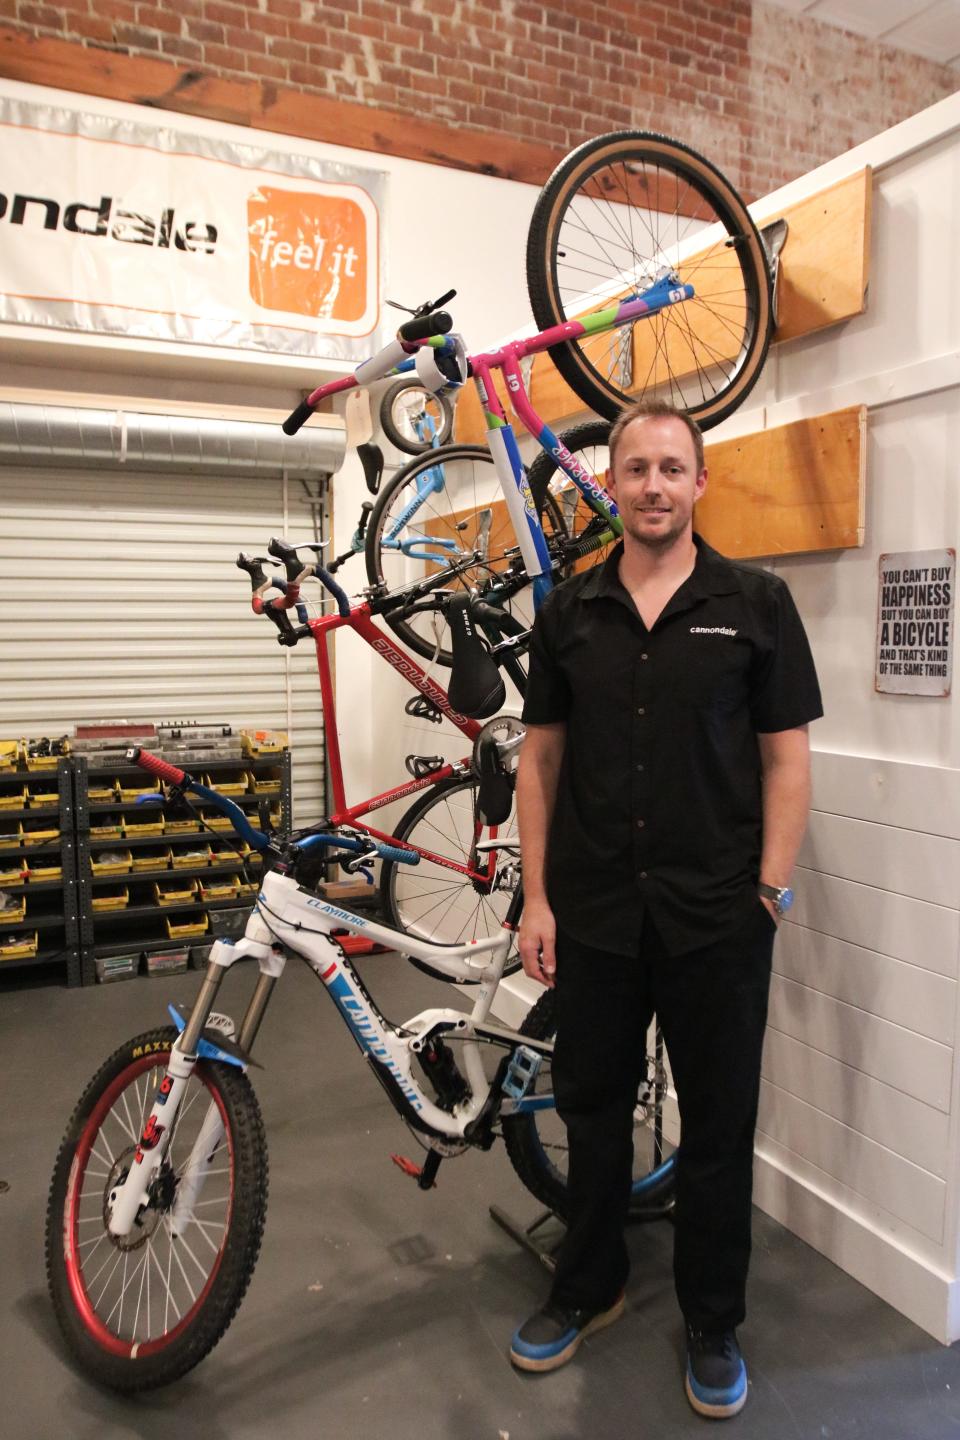 Skunk Ape Cyclery is a new bicycle shop in Panama City. Pictured is owner Kody Gilliam at the grand opening celebration on Feb. 10, 2023.